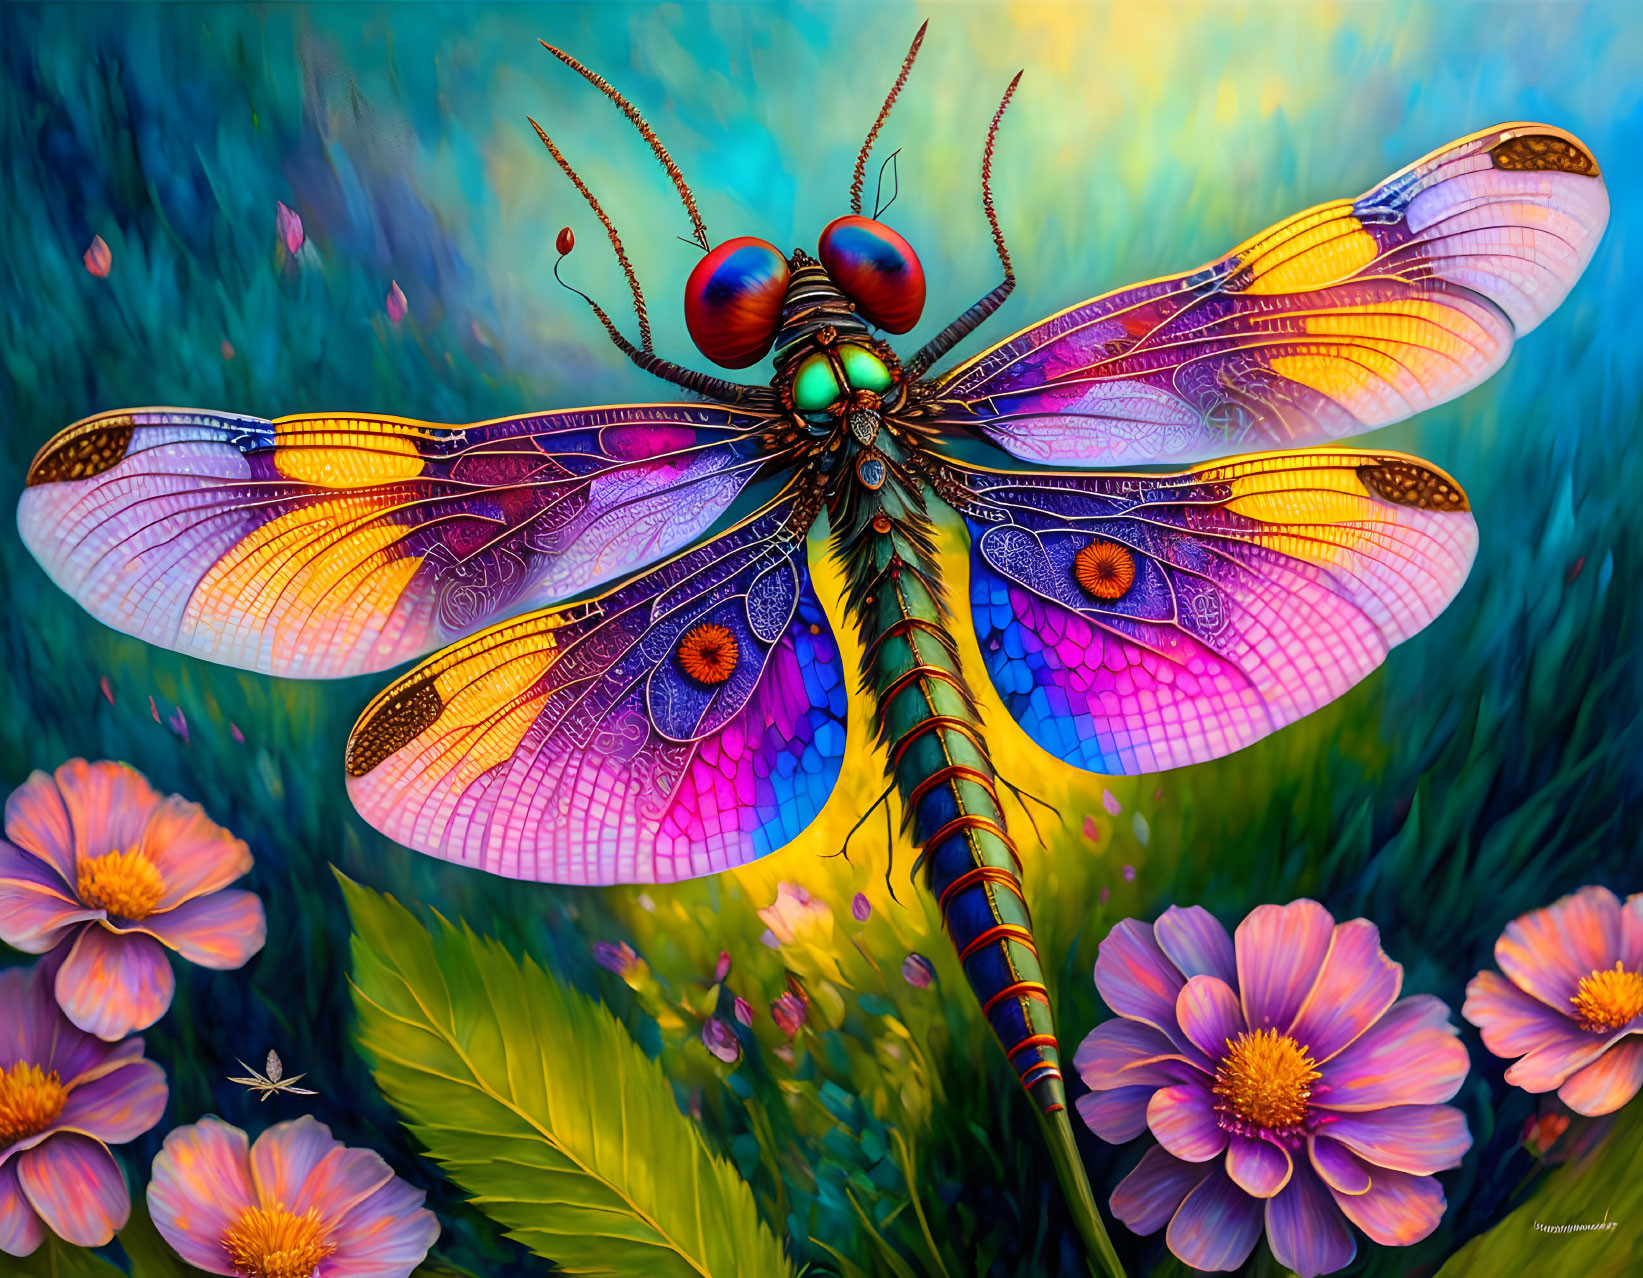 Colorful Dragonfly Illustration with Detailed Wings on Green and Pink Background